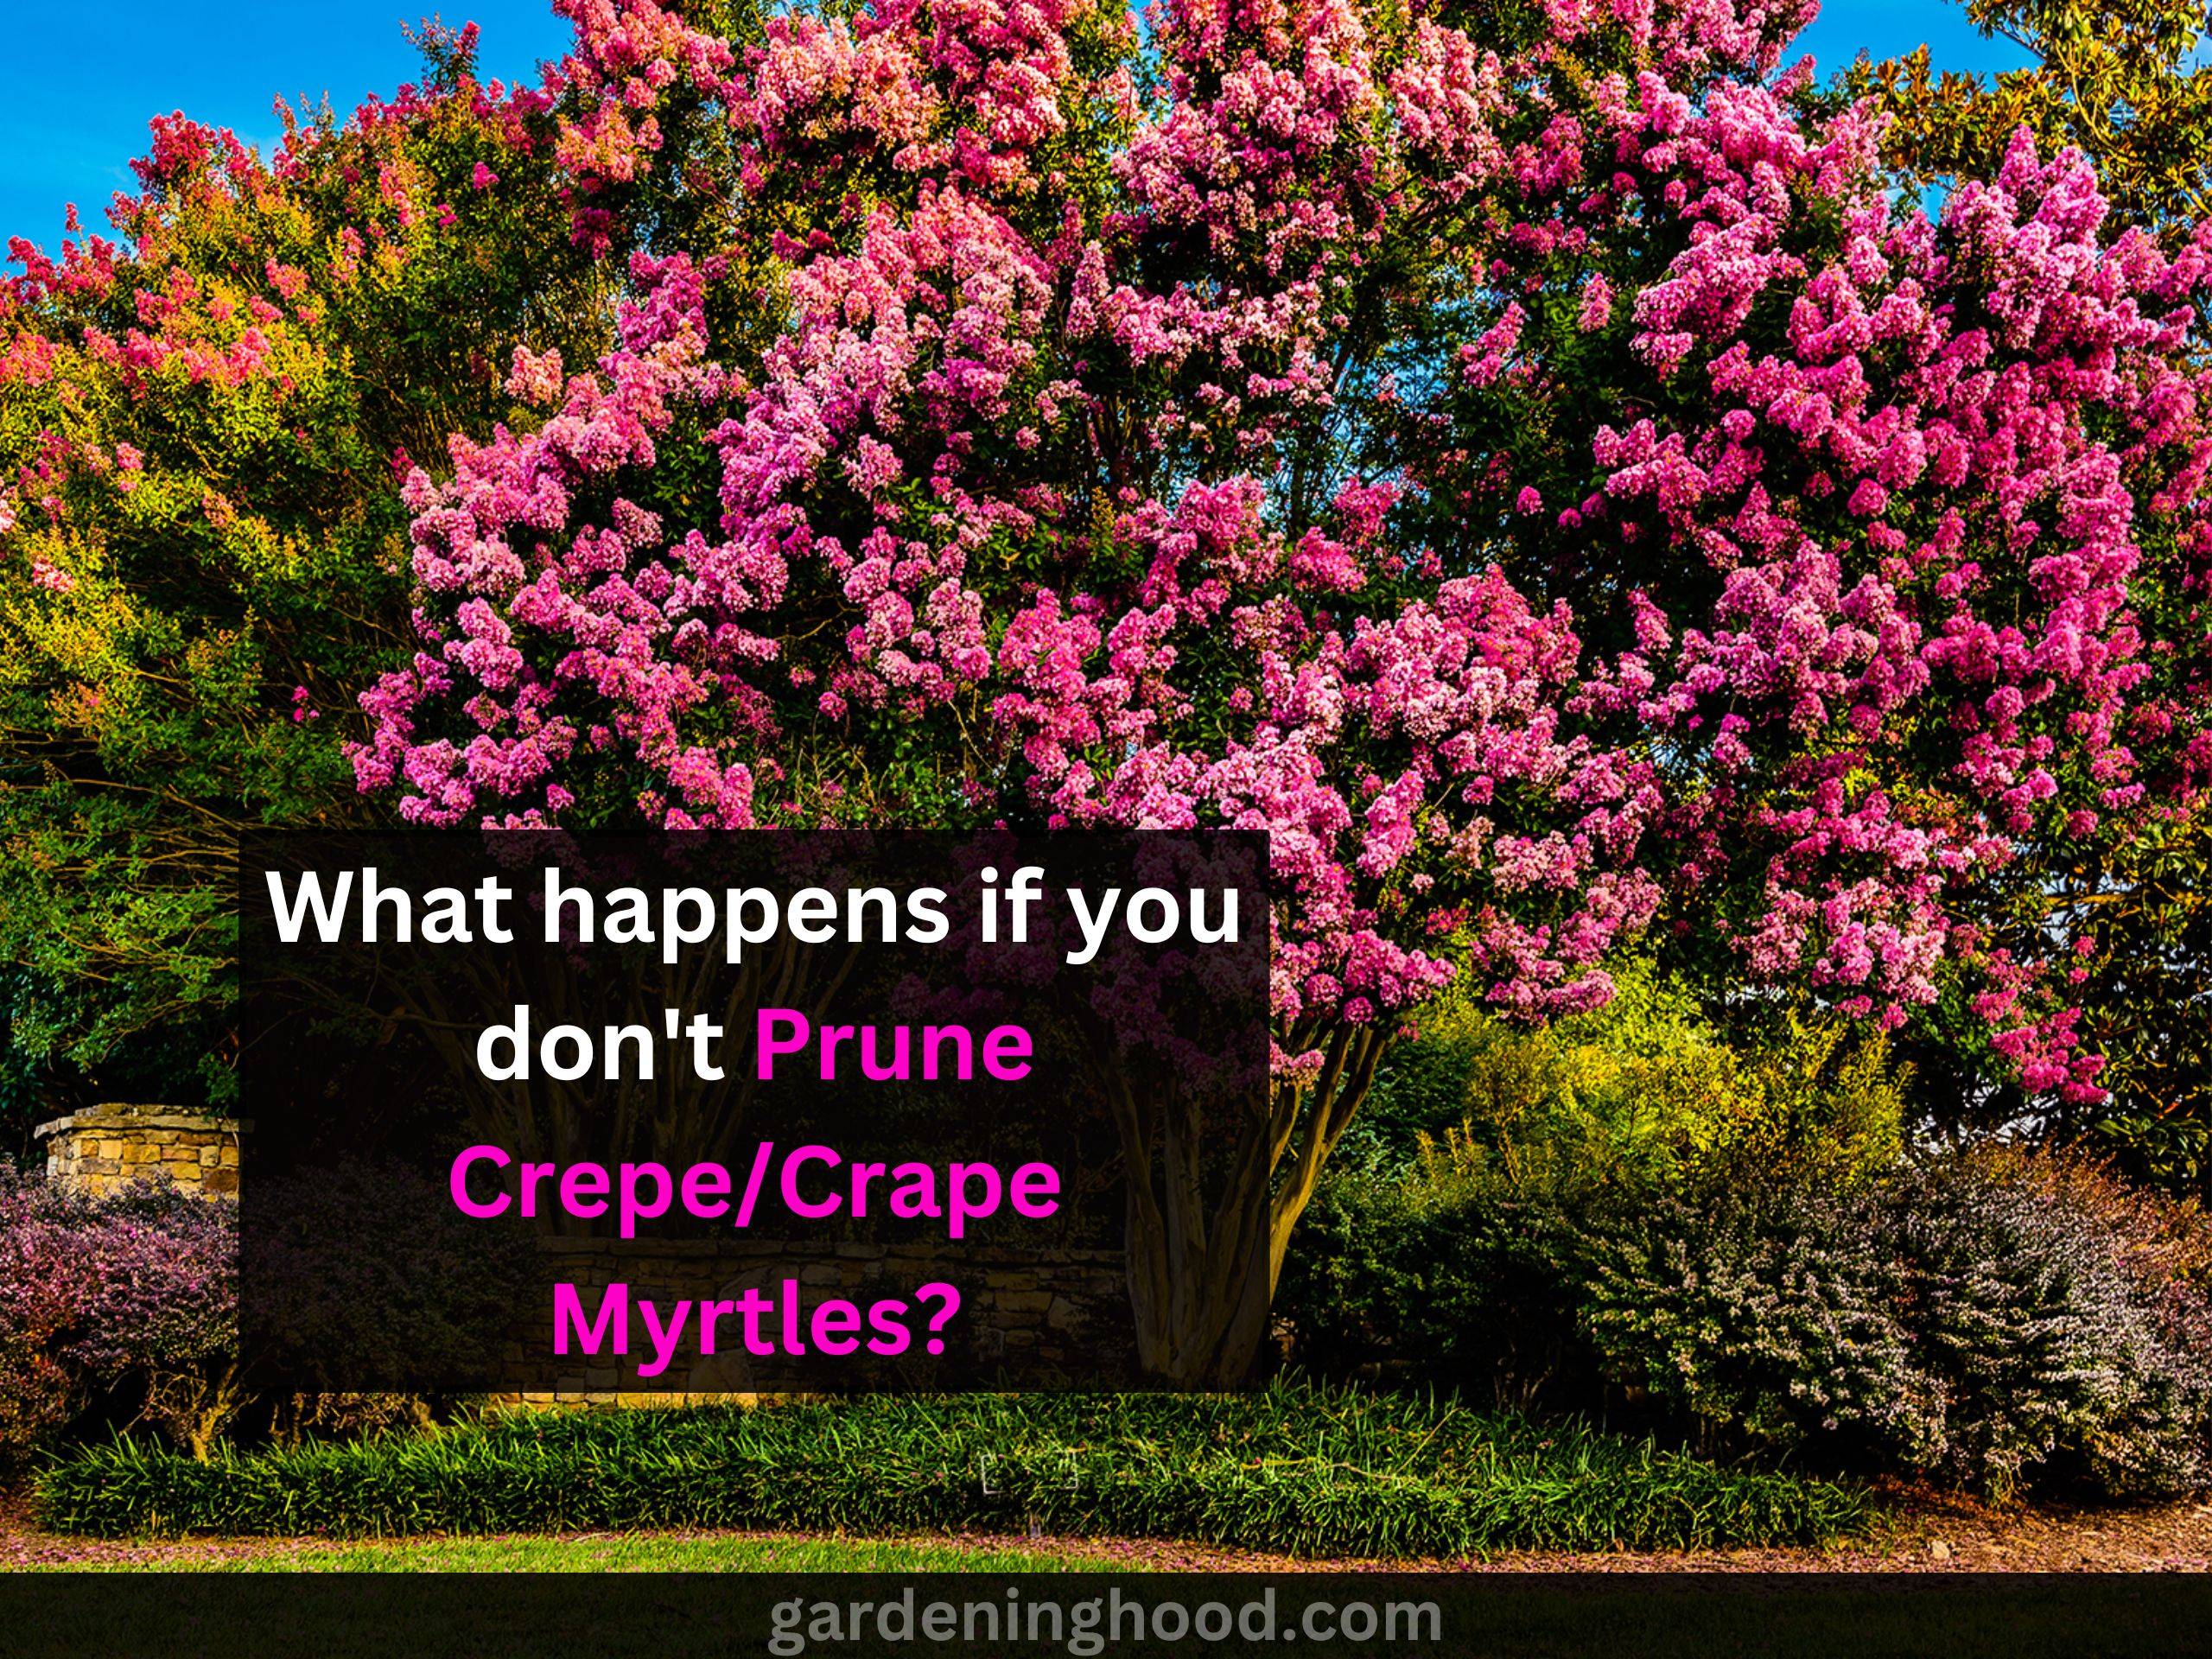 What happens if you don’t Prune Crepe/Crape Myrtles?